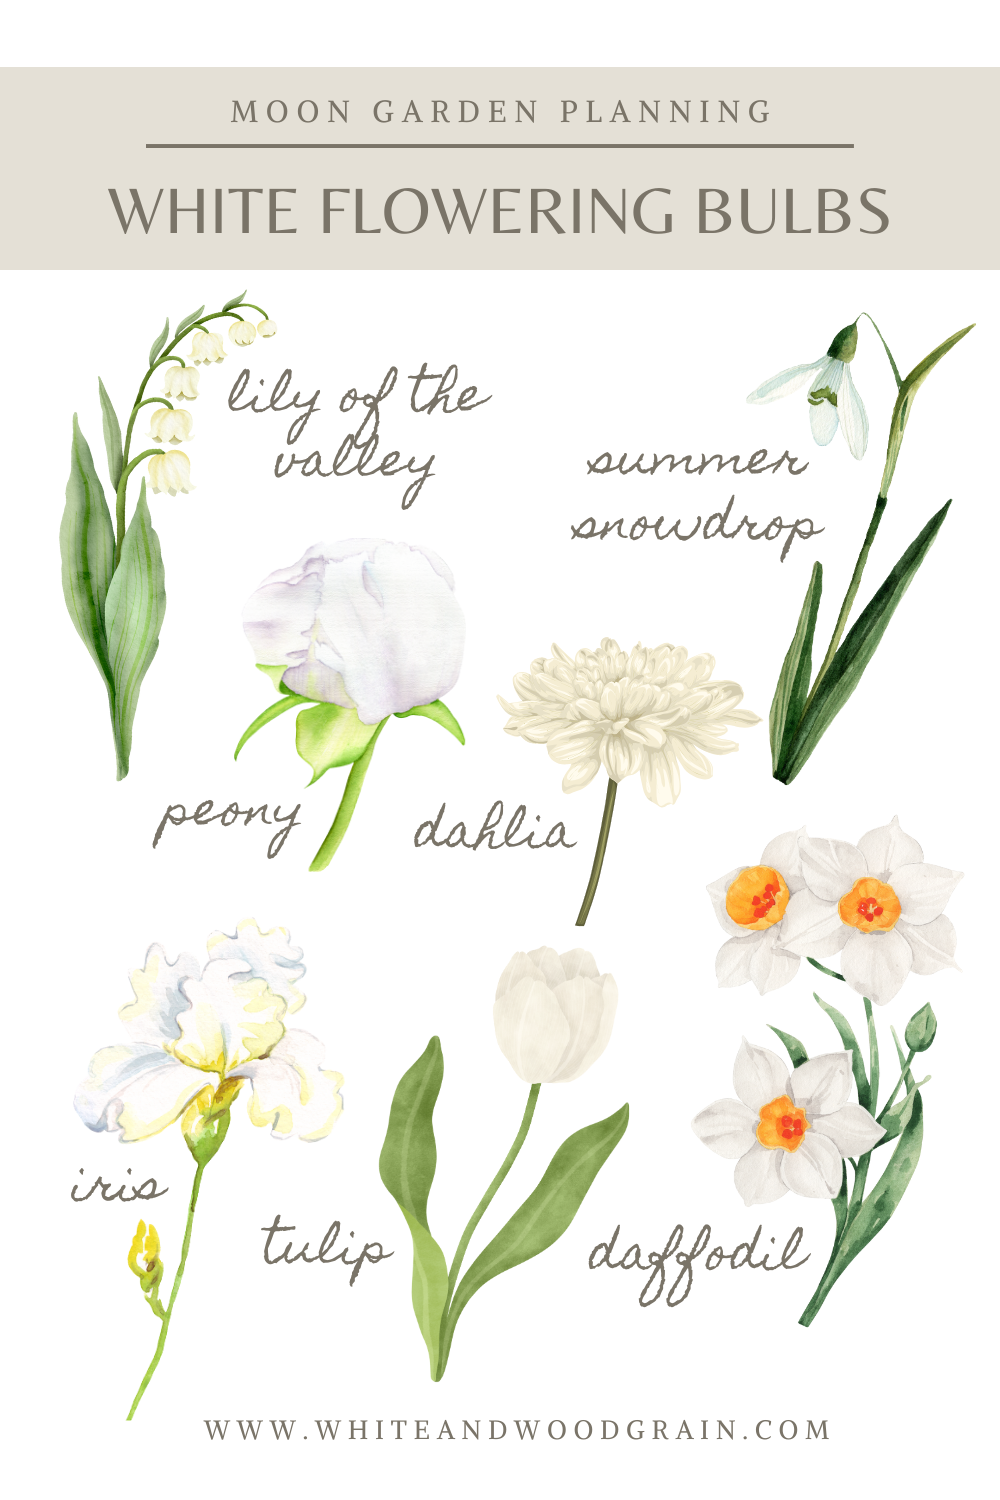 white flowering bulbs to consider when planning a moon garden - lily of the valley, summer snowdrop, peony, dahlia, iris, tulip, and daffodil